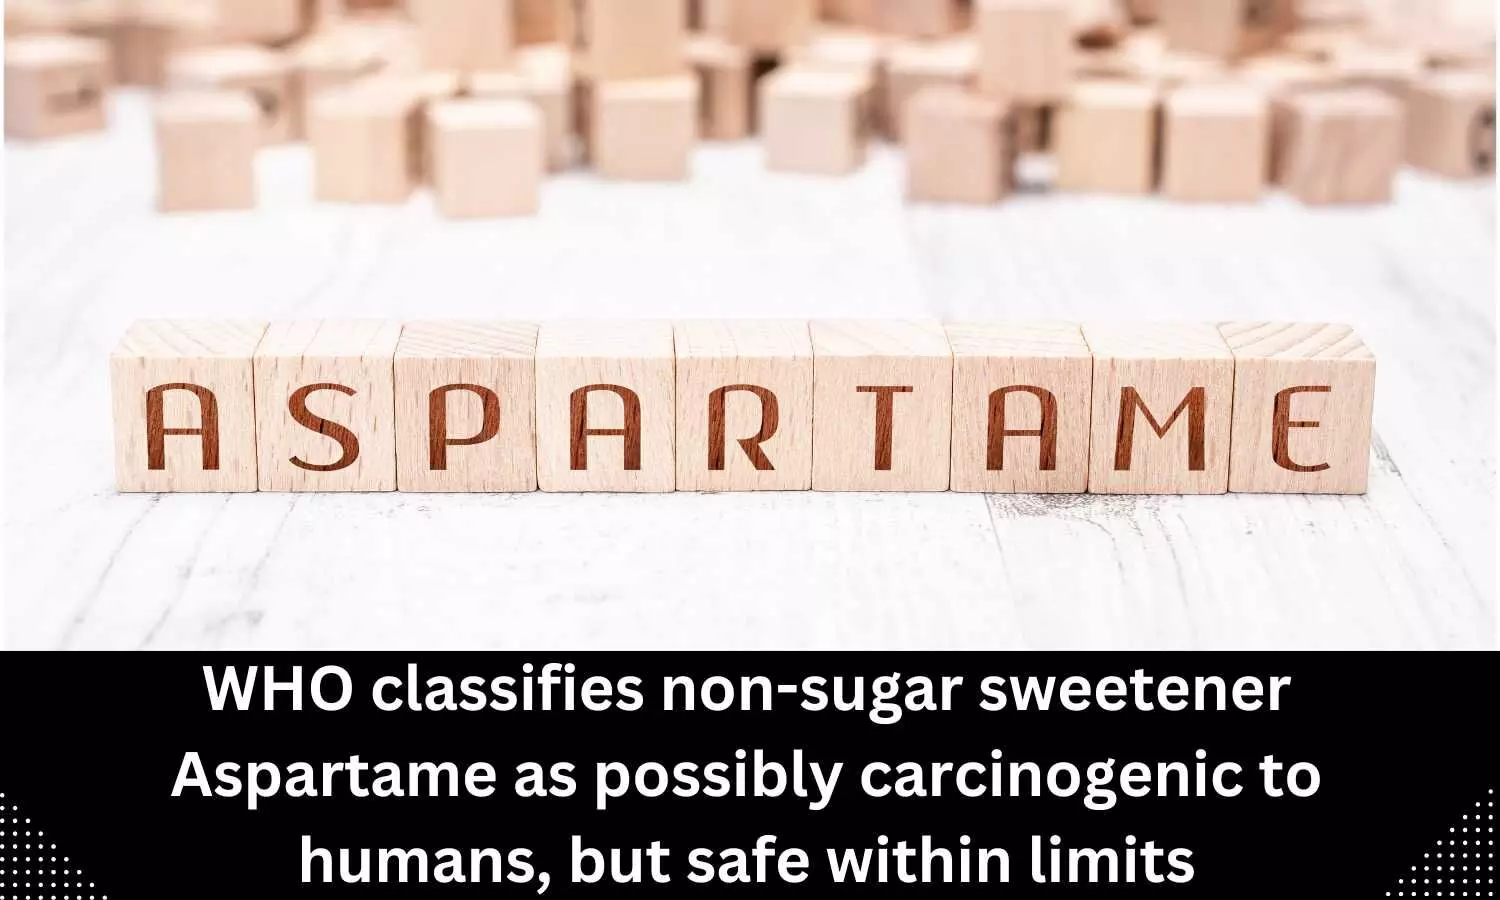 WHO classifies non-sugar sweetener Aspartame as possibly carcinogenic to humans, but safe within limits